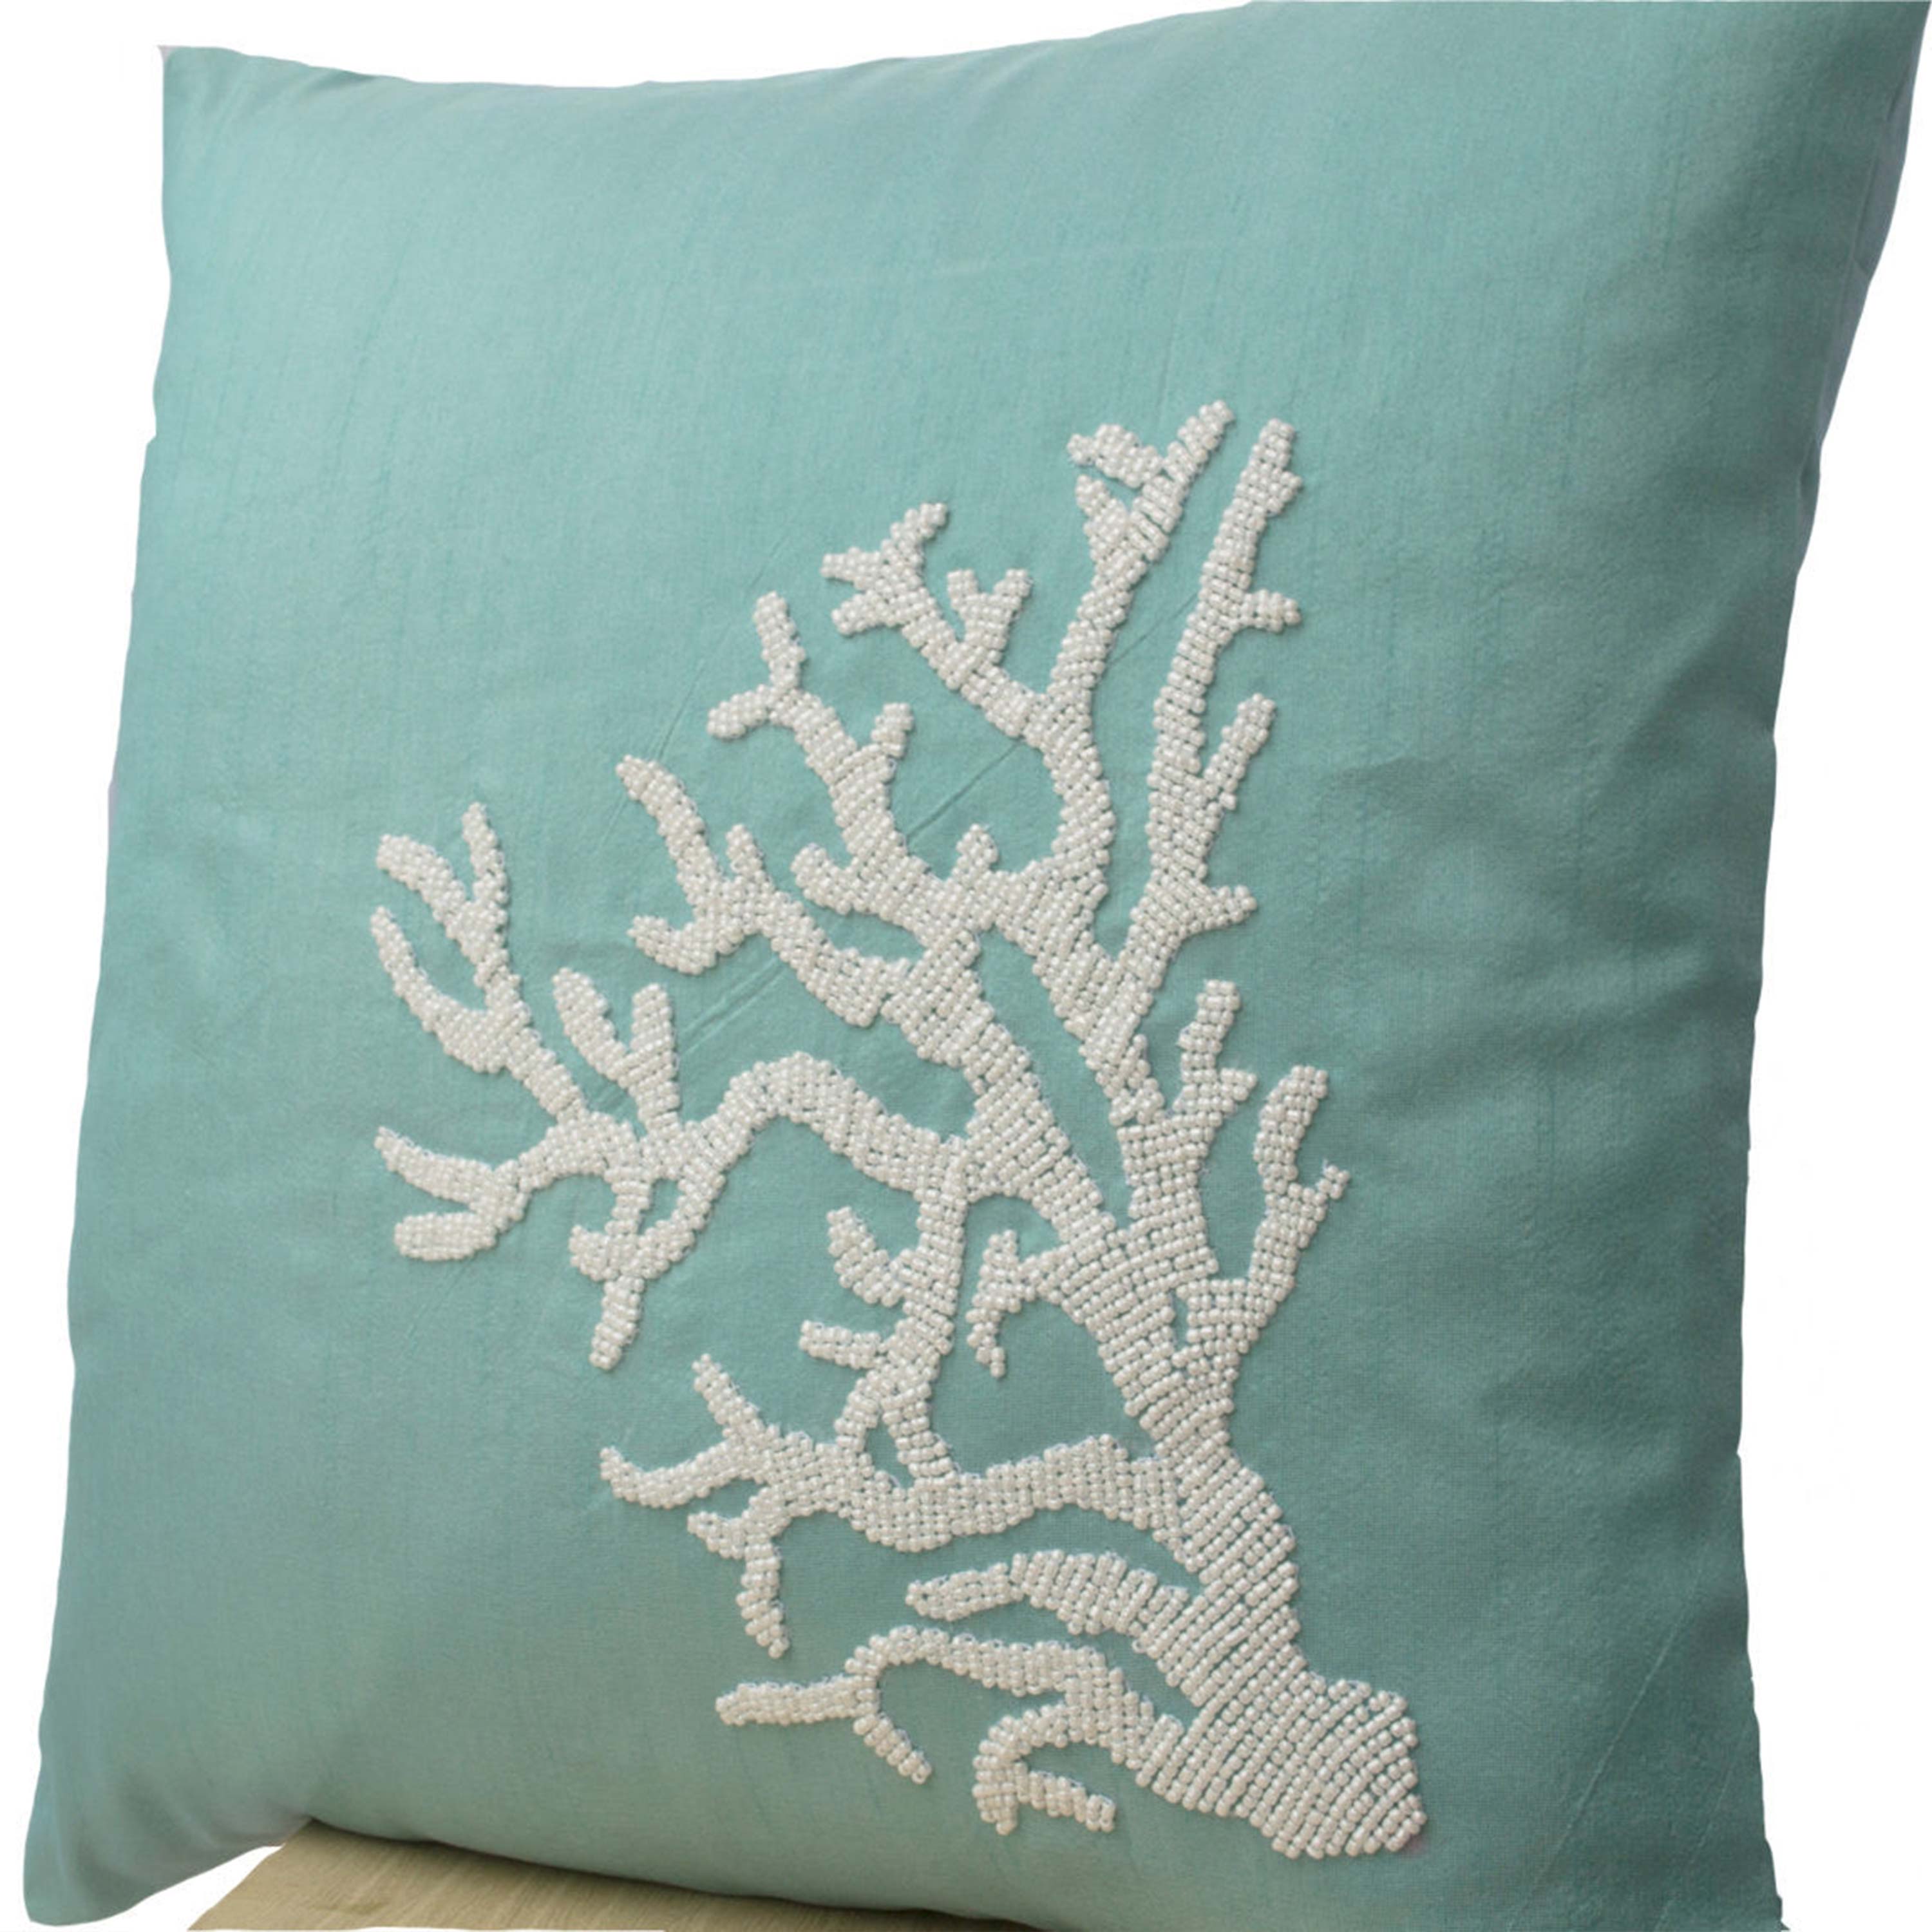 Teal Decorative pillow with white coral in beads -Oceanic pillows -Teal cushion -Embroidered Pillow- 16X16-Couch pillows -Coral reef pillow